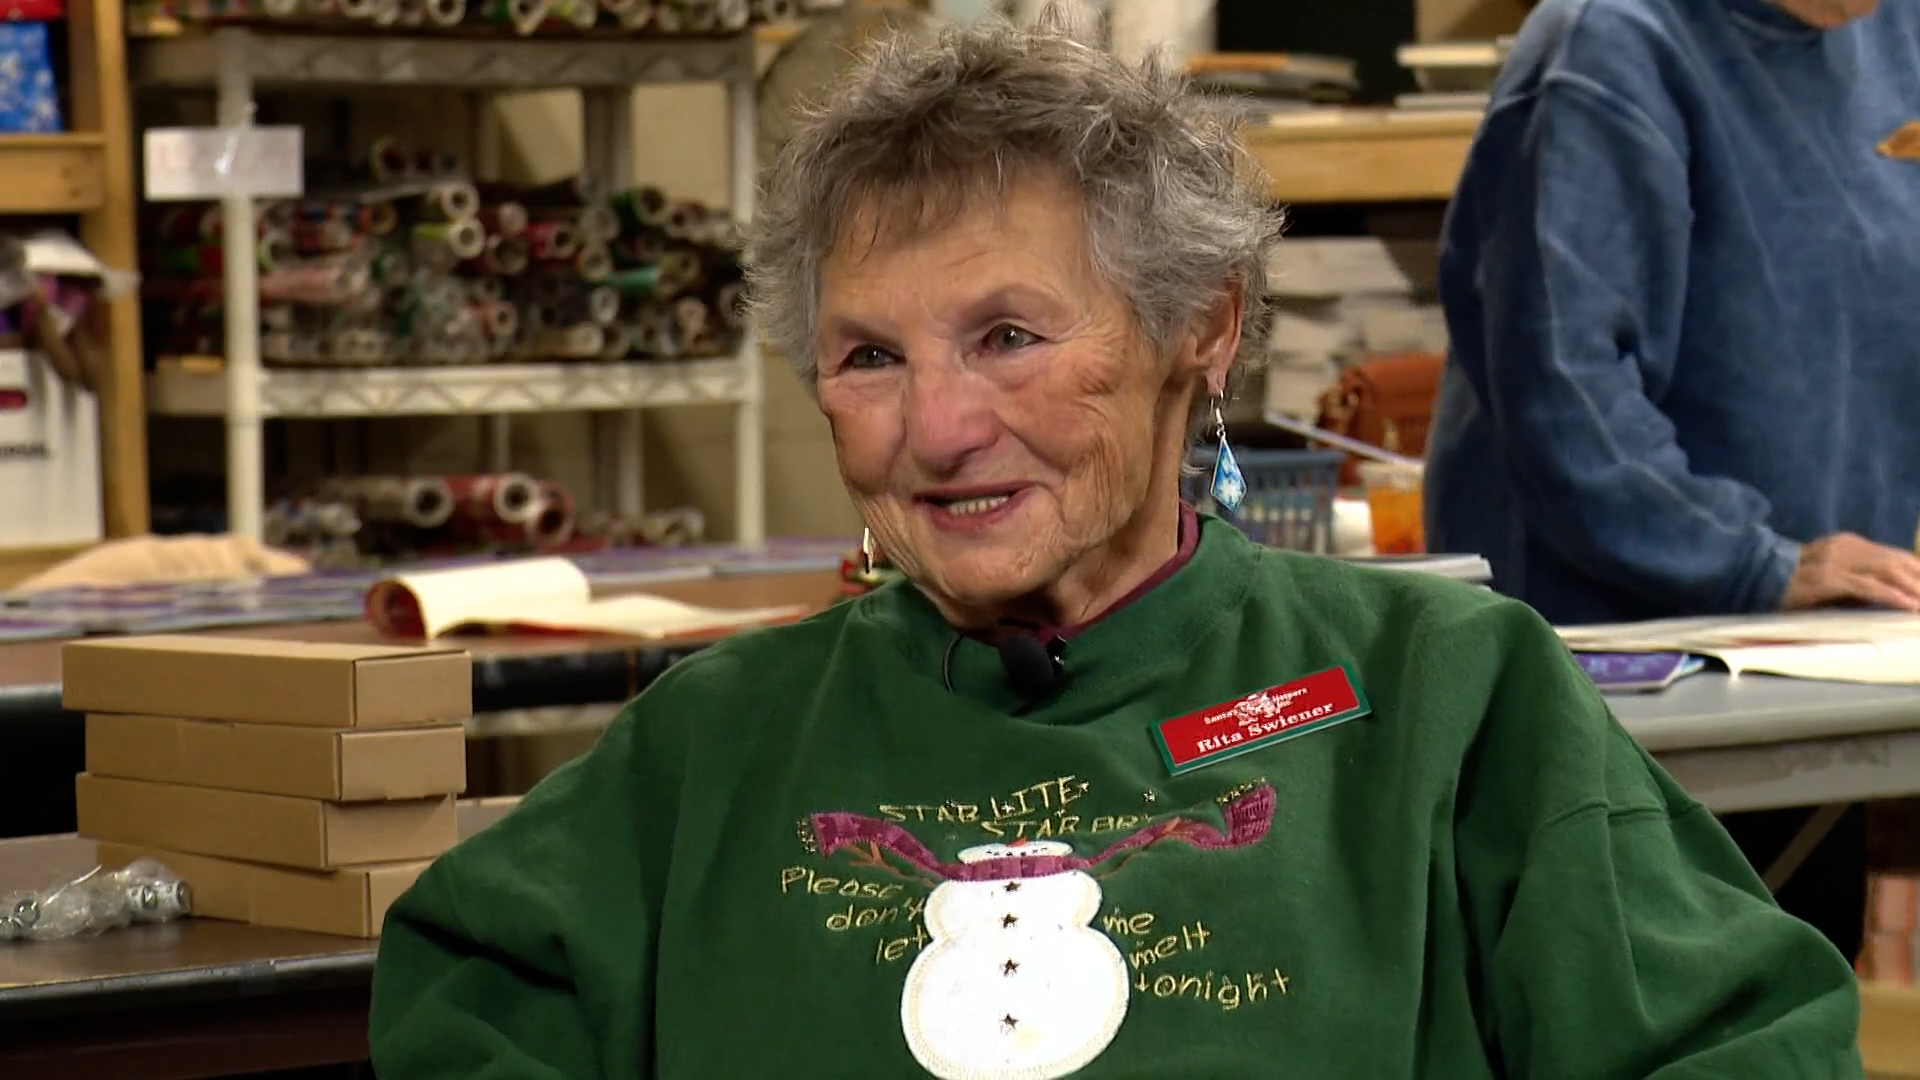 St. Louis woman shares why she continues granting Christmas wishes for kids in need